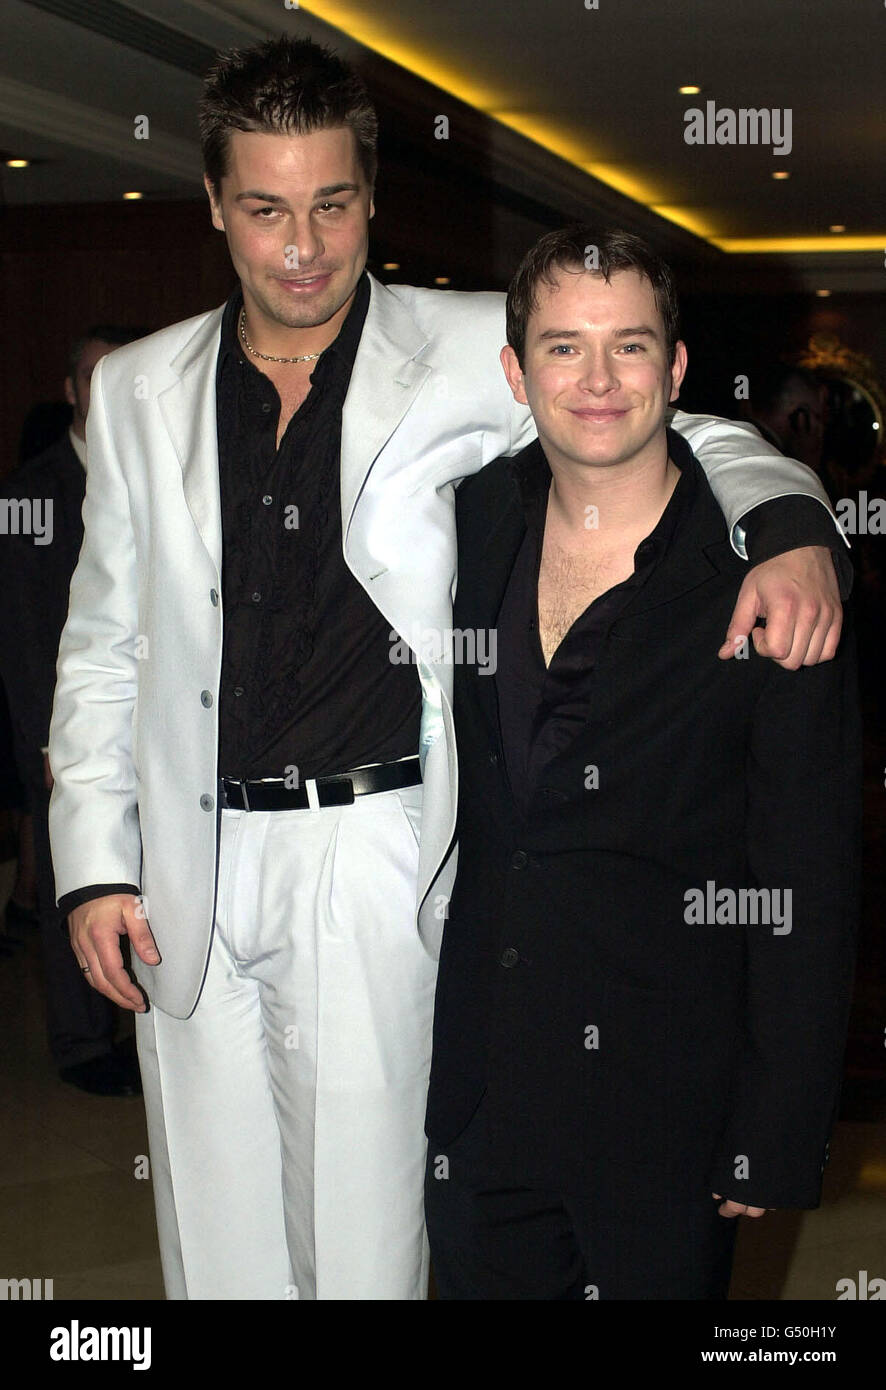 Singer Stephen Gately from Boyzone and boyfriend, Eloy de Jong arrive at the Royal Lancaster Hotel in central London for the Capital FM London Awards. Stock Photo